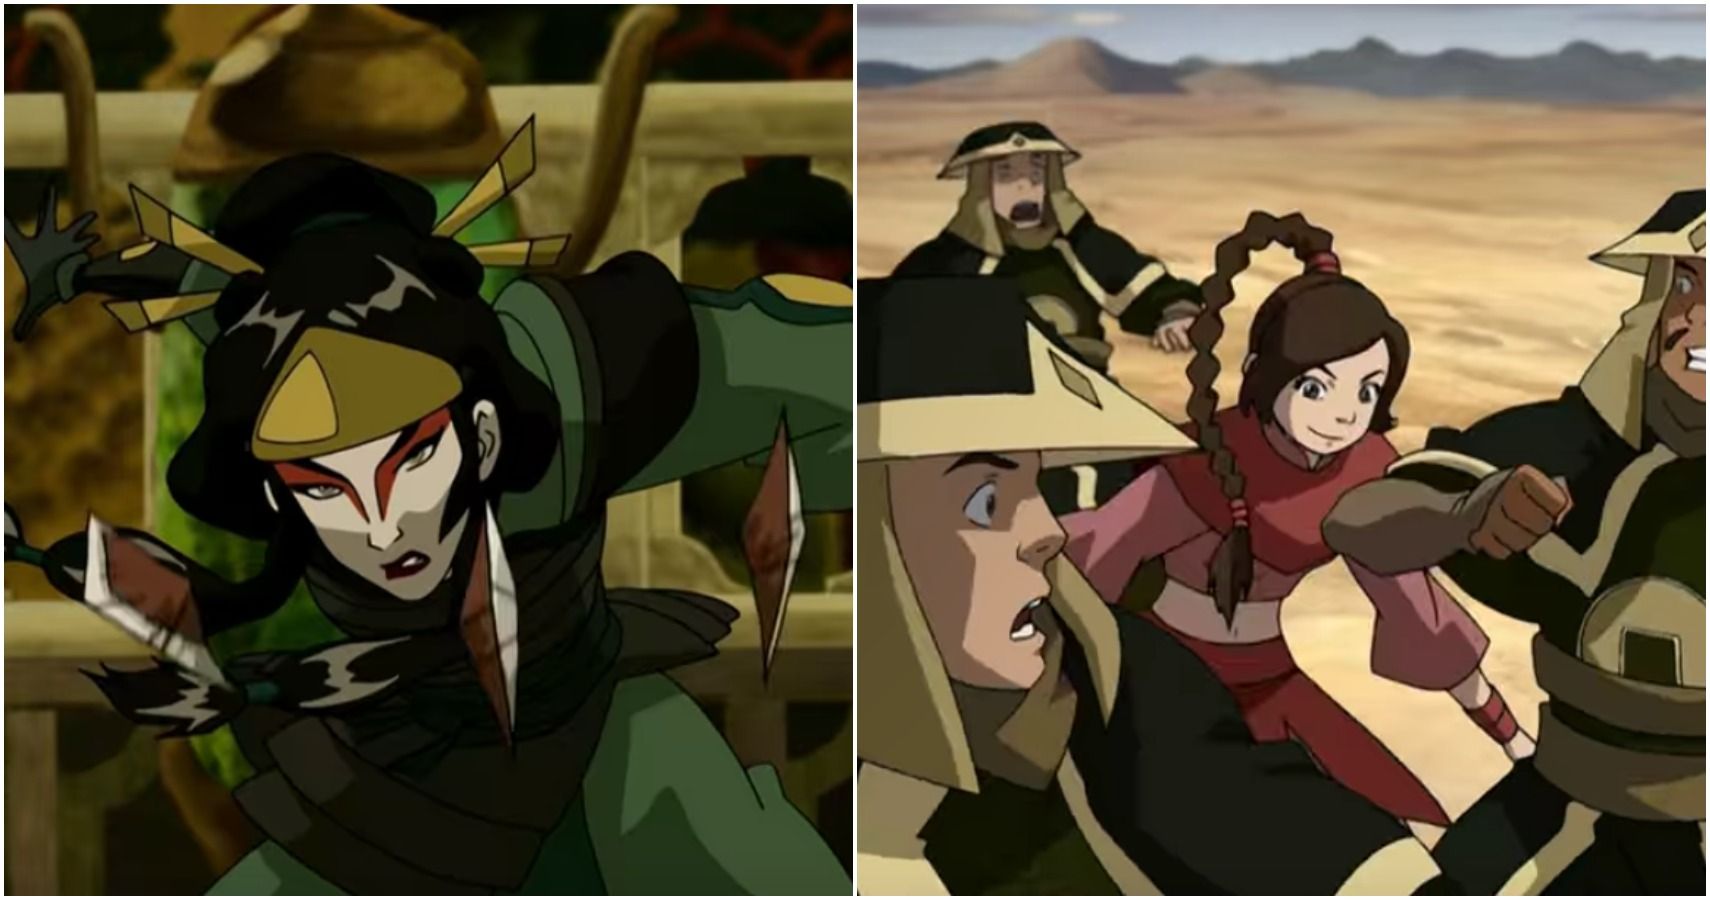 Avatar: The Last Airbender – Who Is The Stronger Non-Bender, Mai Or Ty Lee?